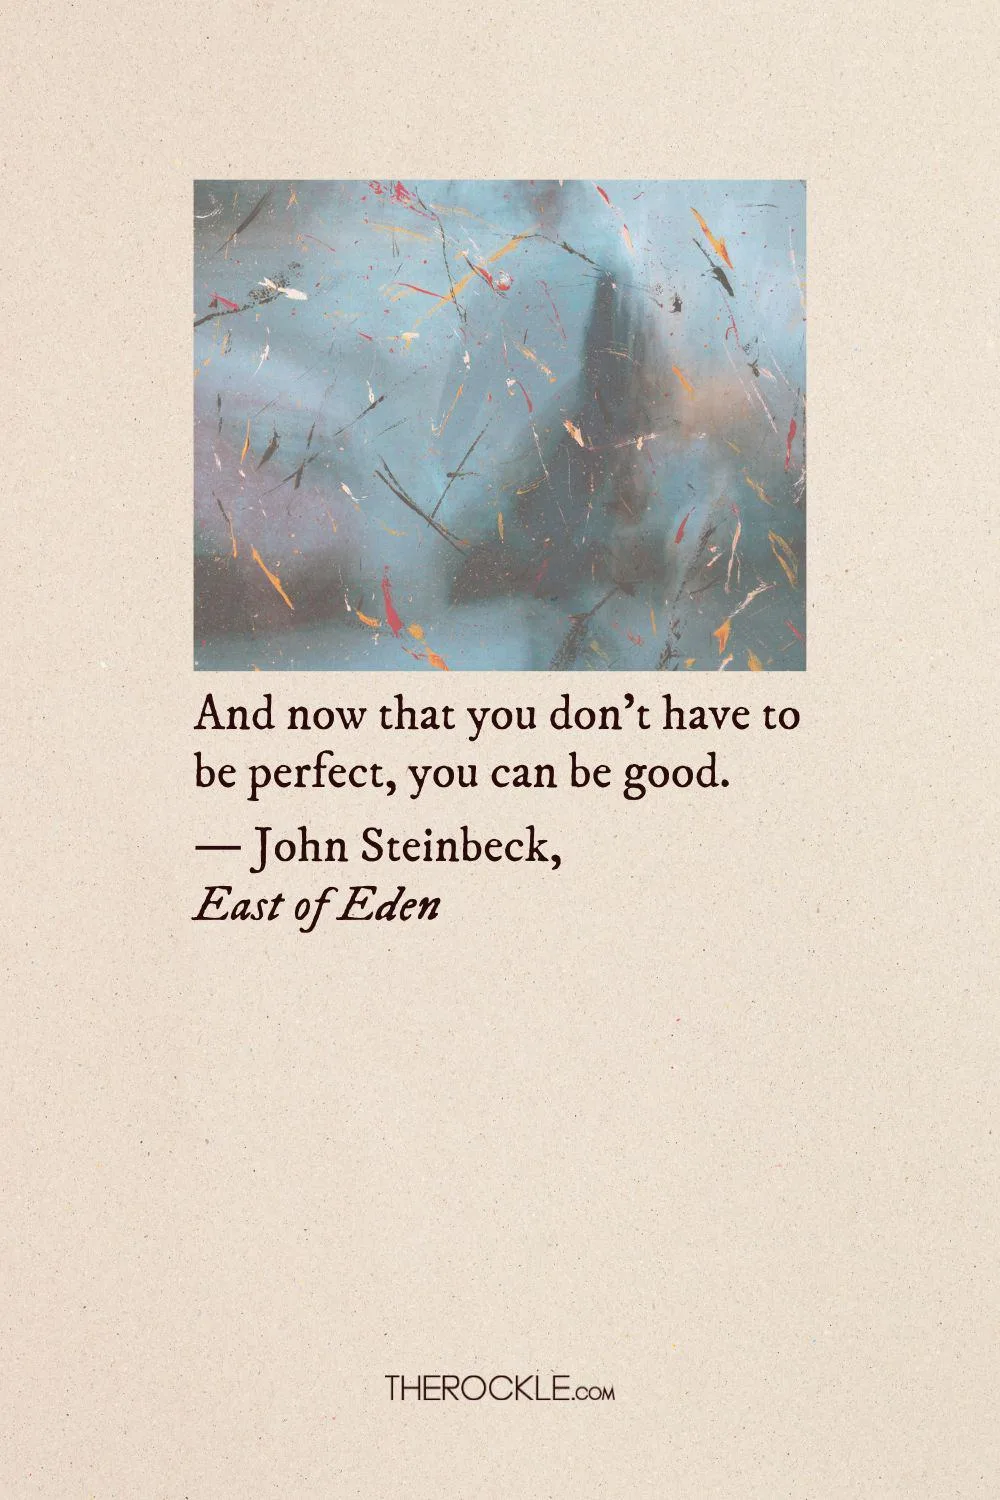 John Steinbeck quote on embracing imperfection